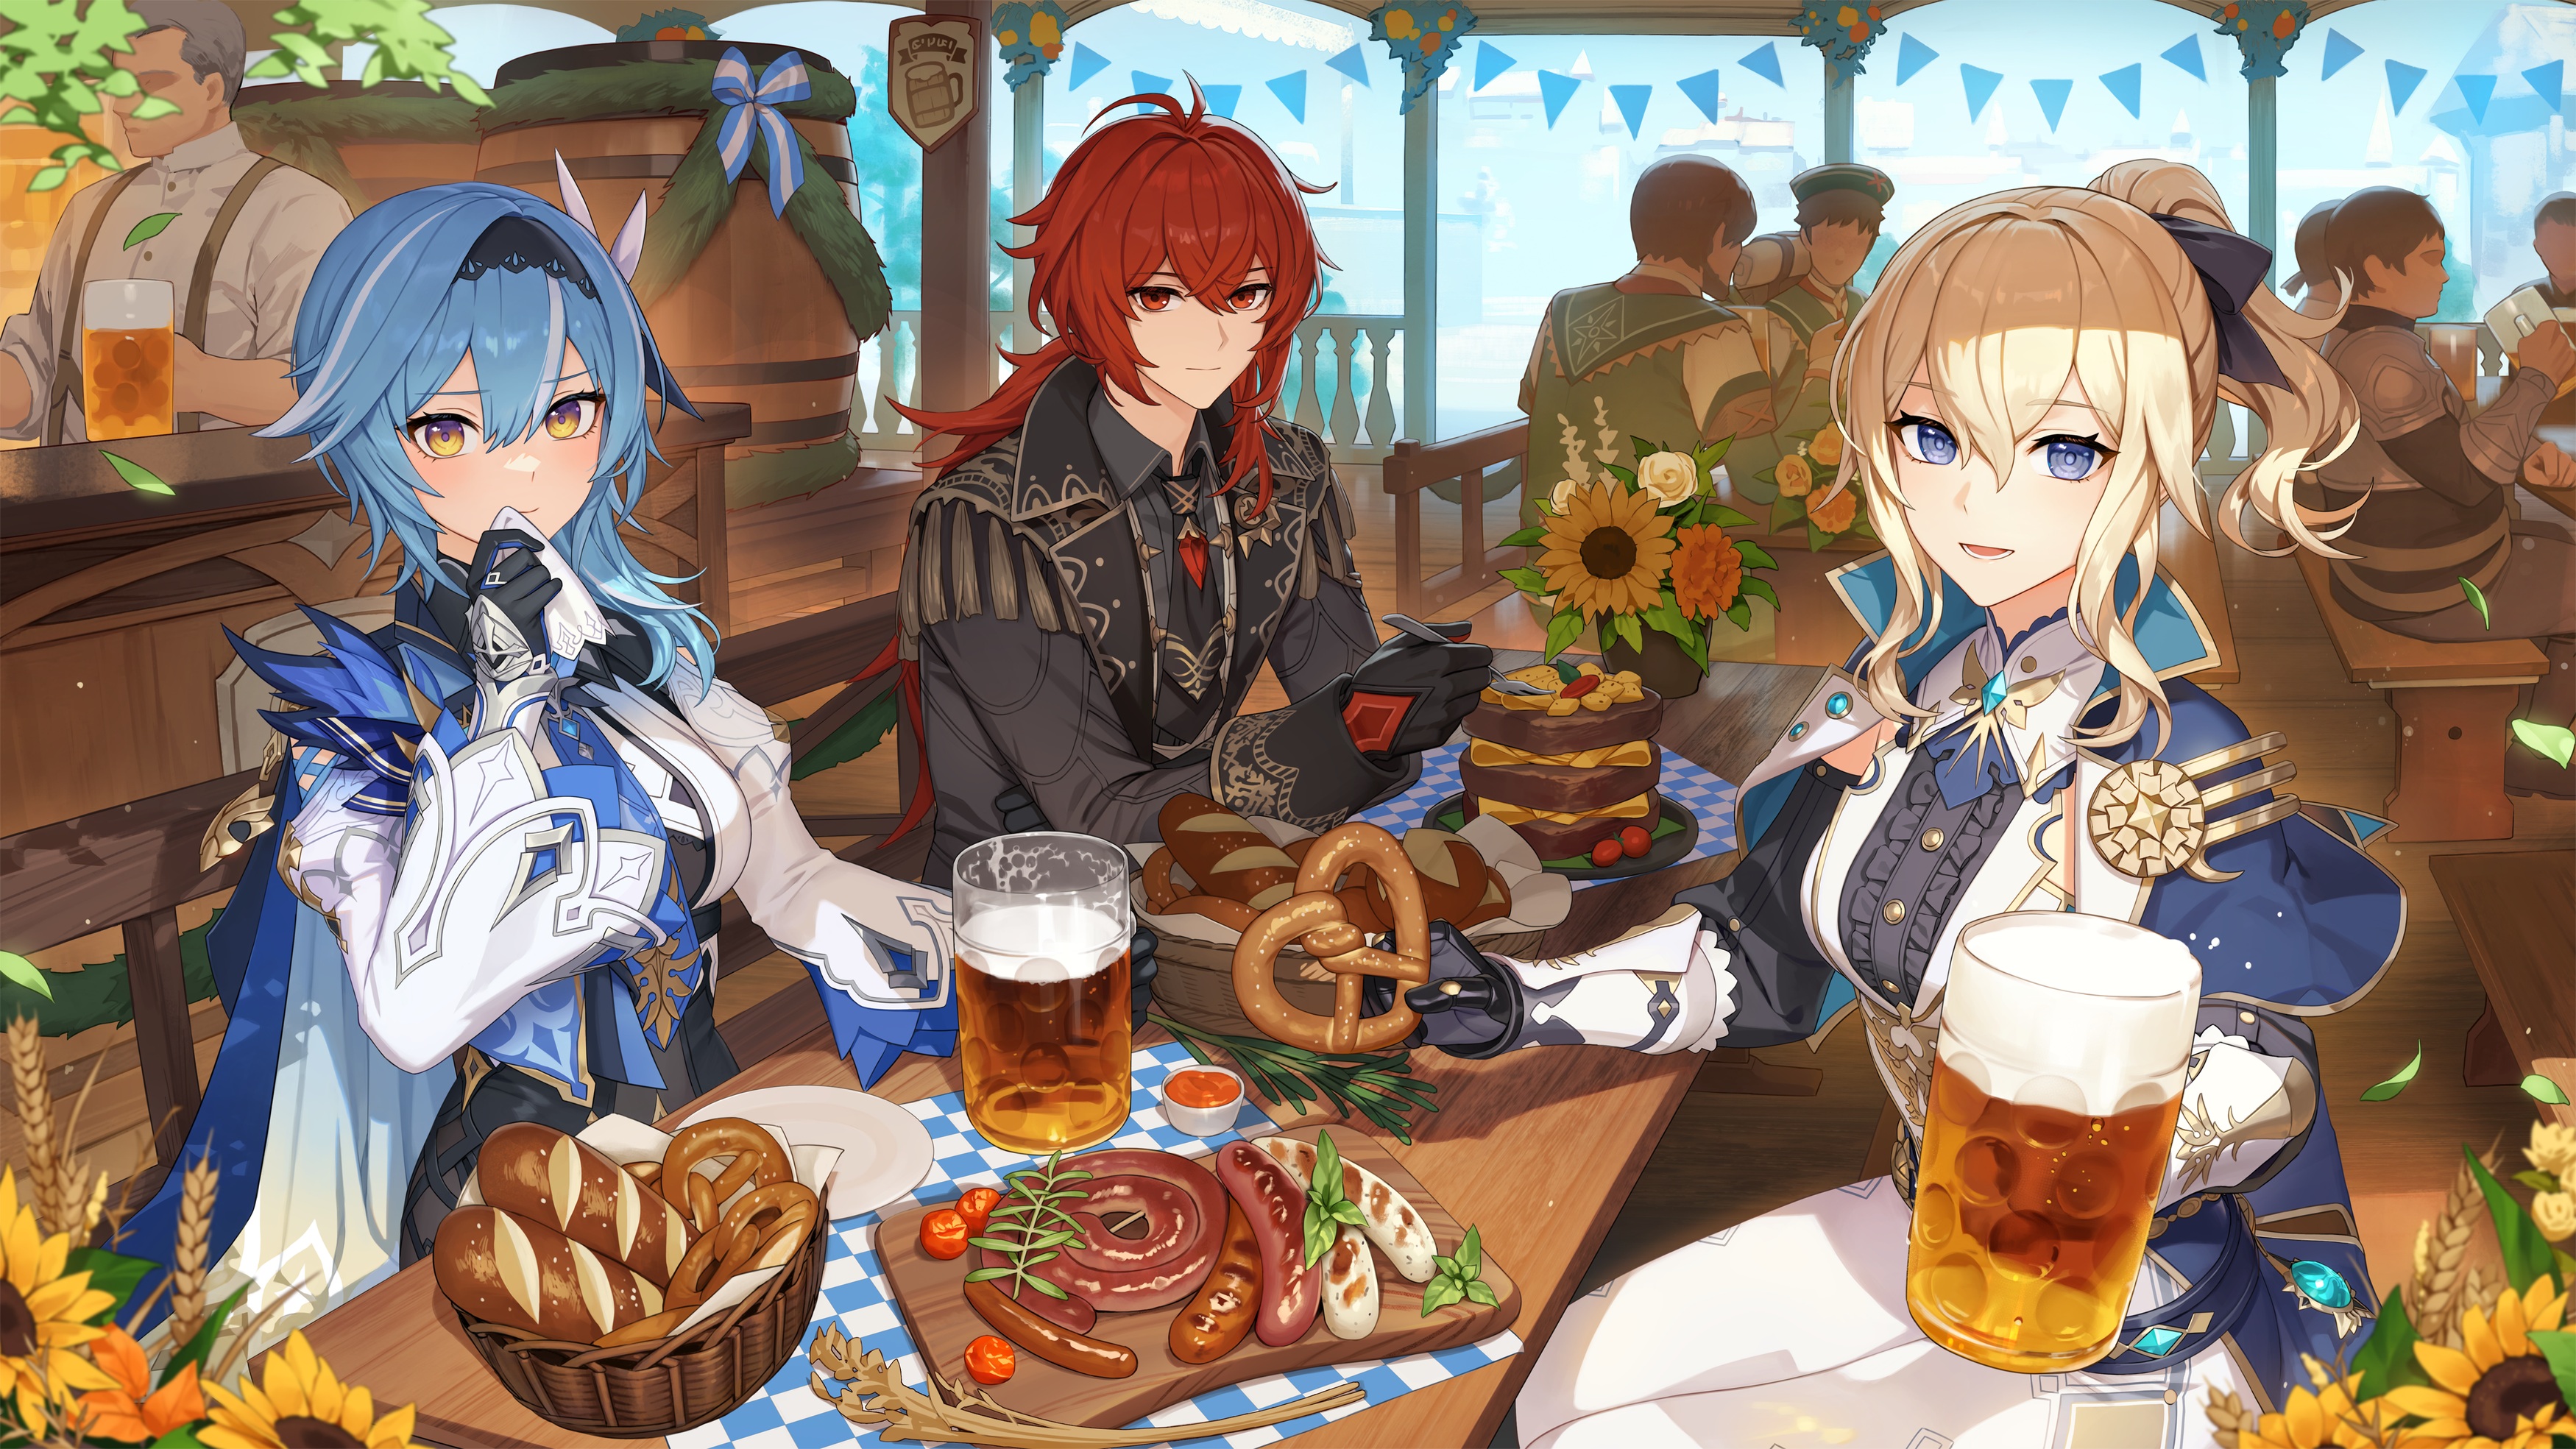 Anime 3500x1969 Genshin Impact food anime girls anime boys Eula (Genshin Impact) Diluc (Genshin Impact) Jean (Genshin Impact) group of people bread sausage looking at viewer alcohol beer sitting flowers hair ornament eating sunflowers smiling table